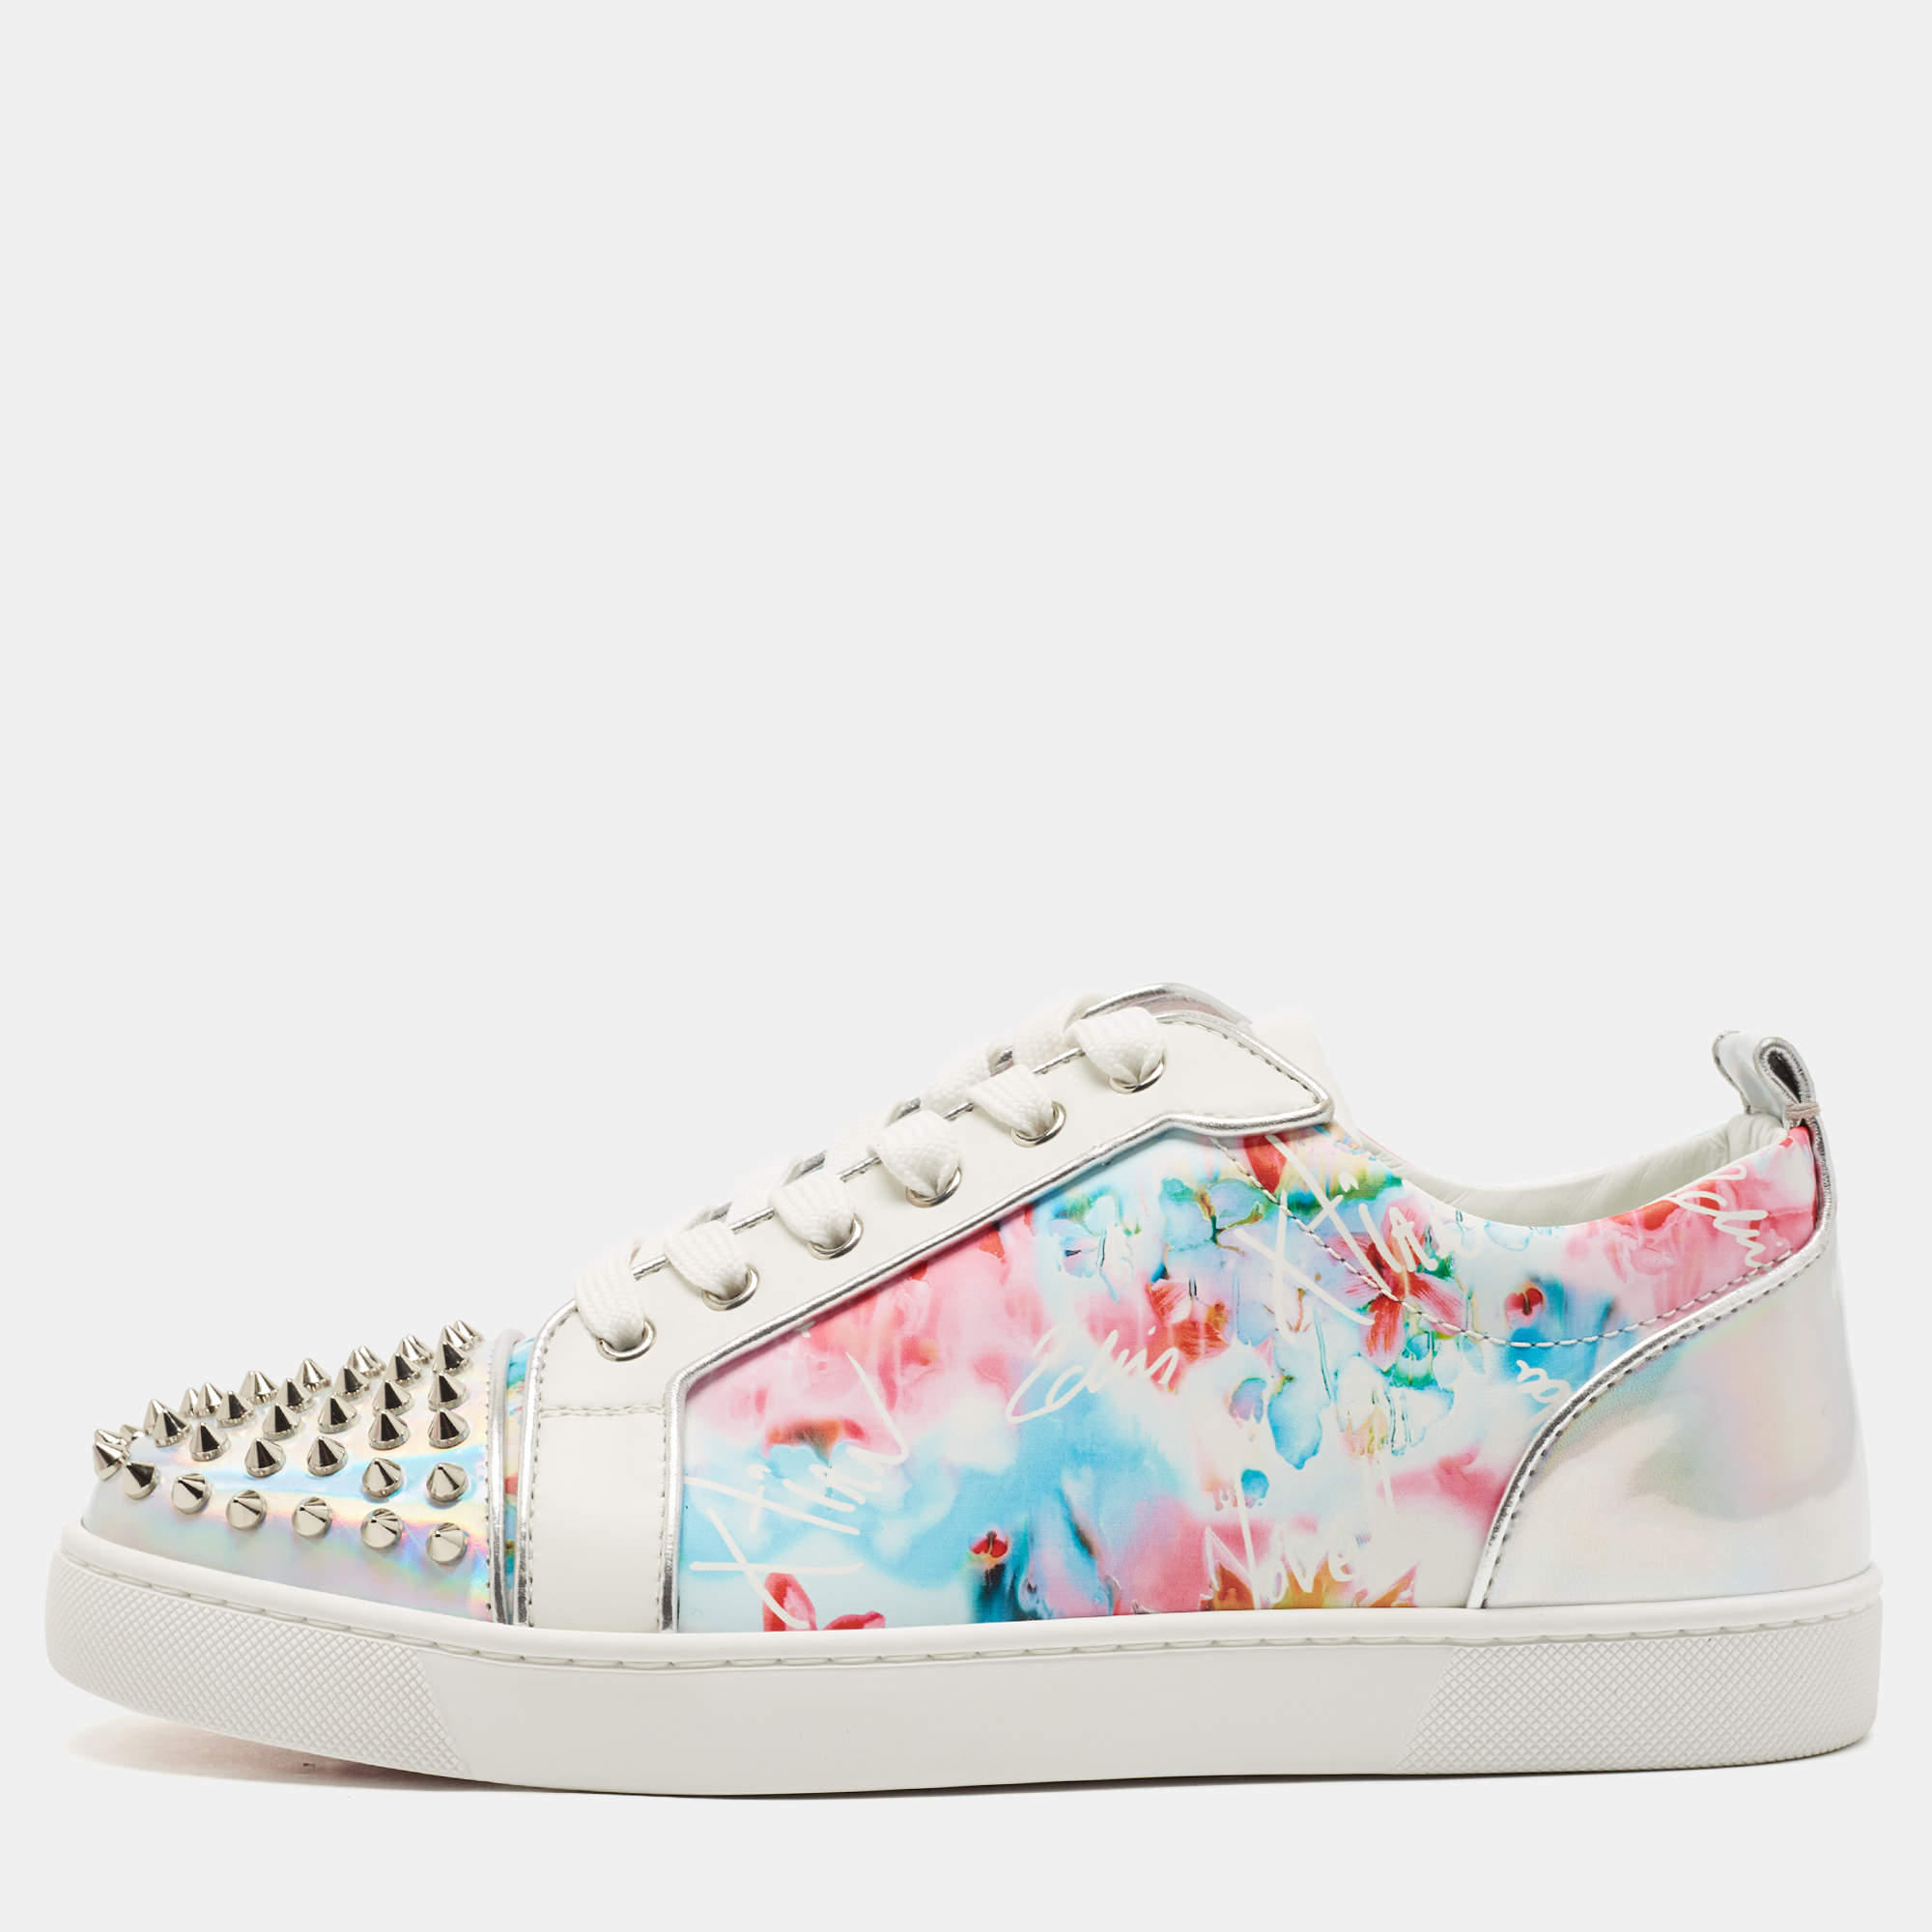 Christian Louboutin Multicolor Floral Print Leather and Laminated Leather Louis Spike Junior Low Top Sneakers Size 43